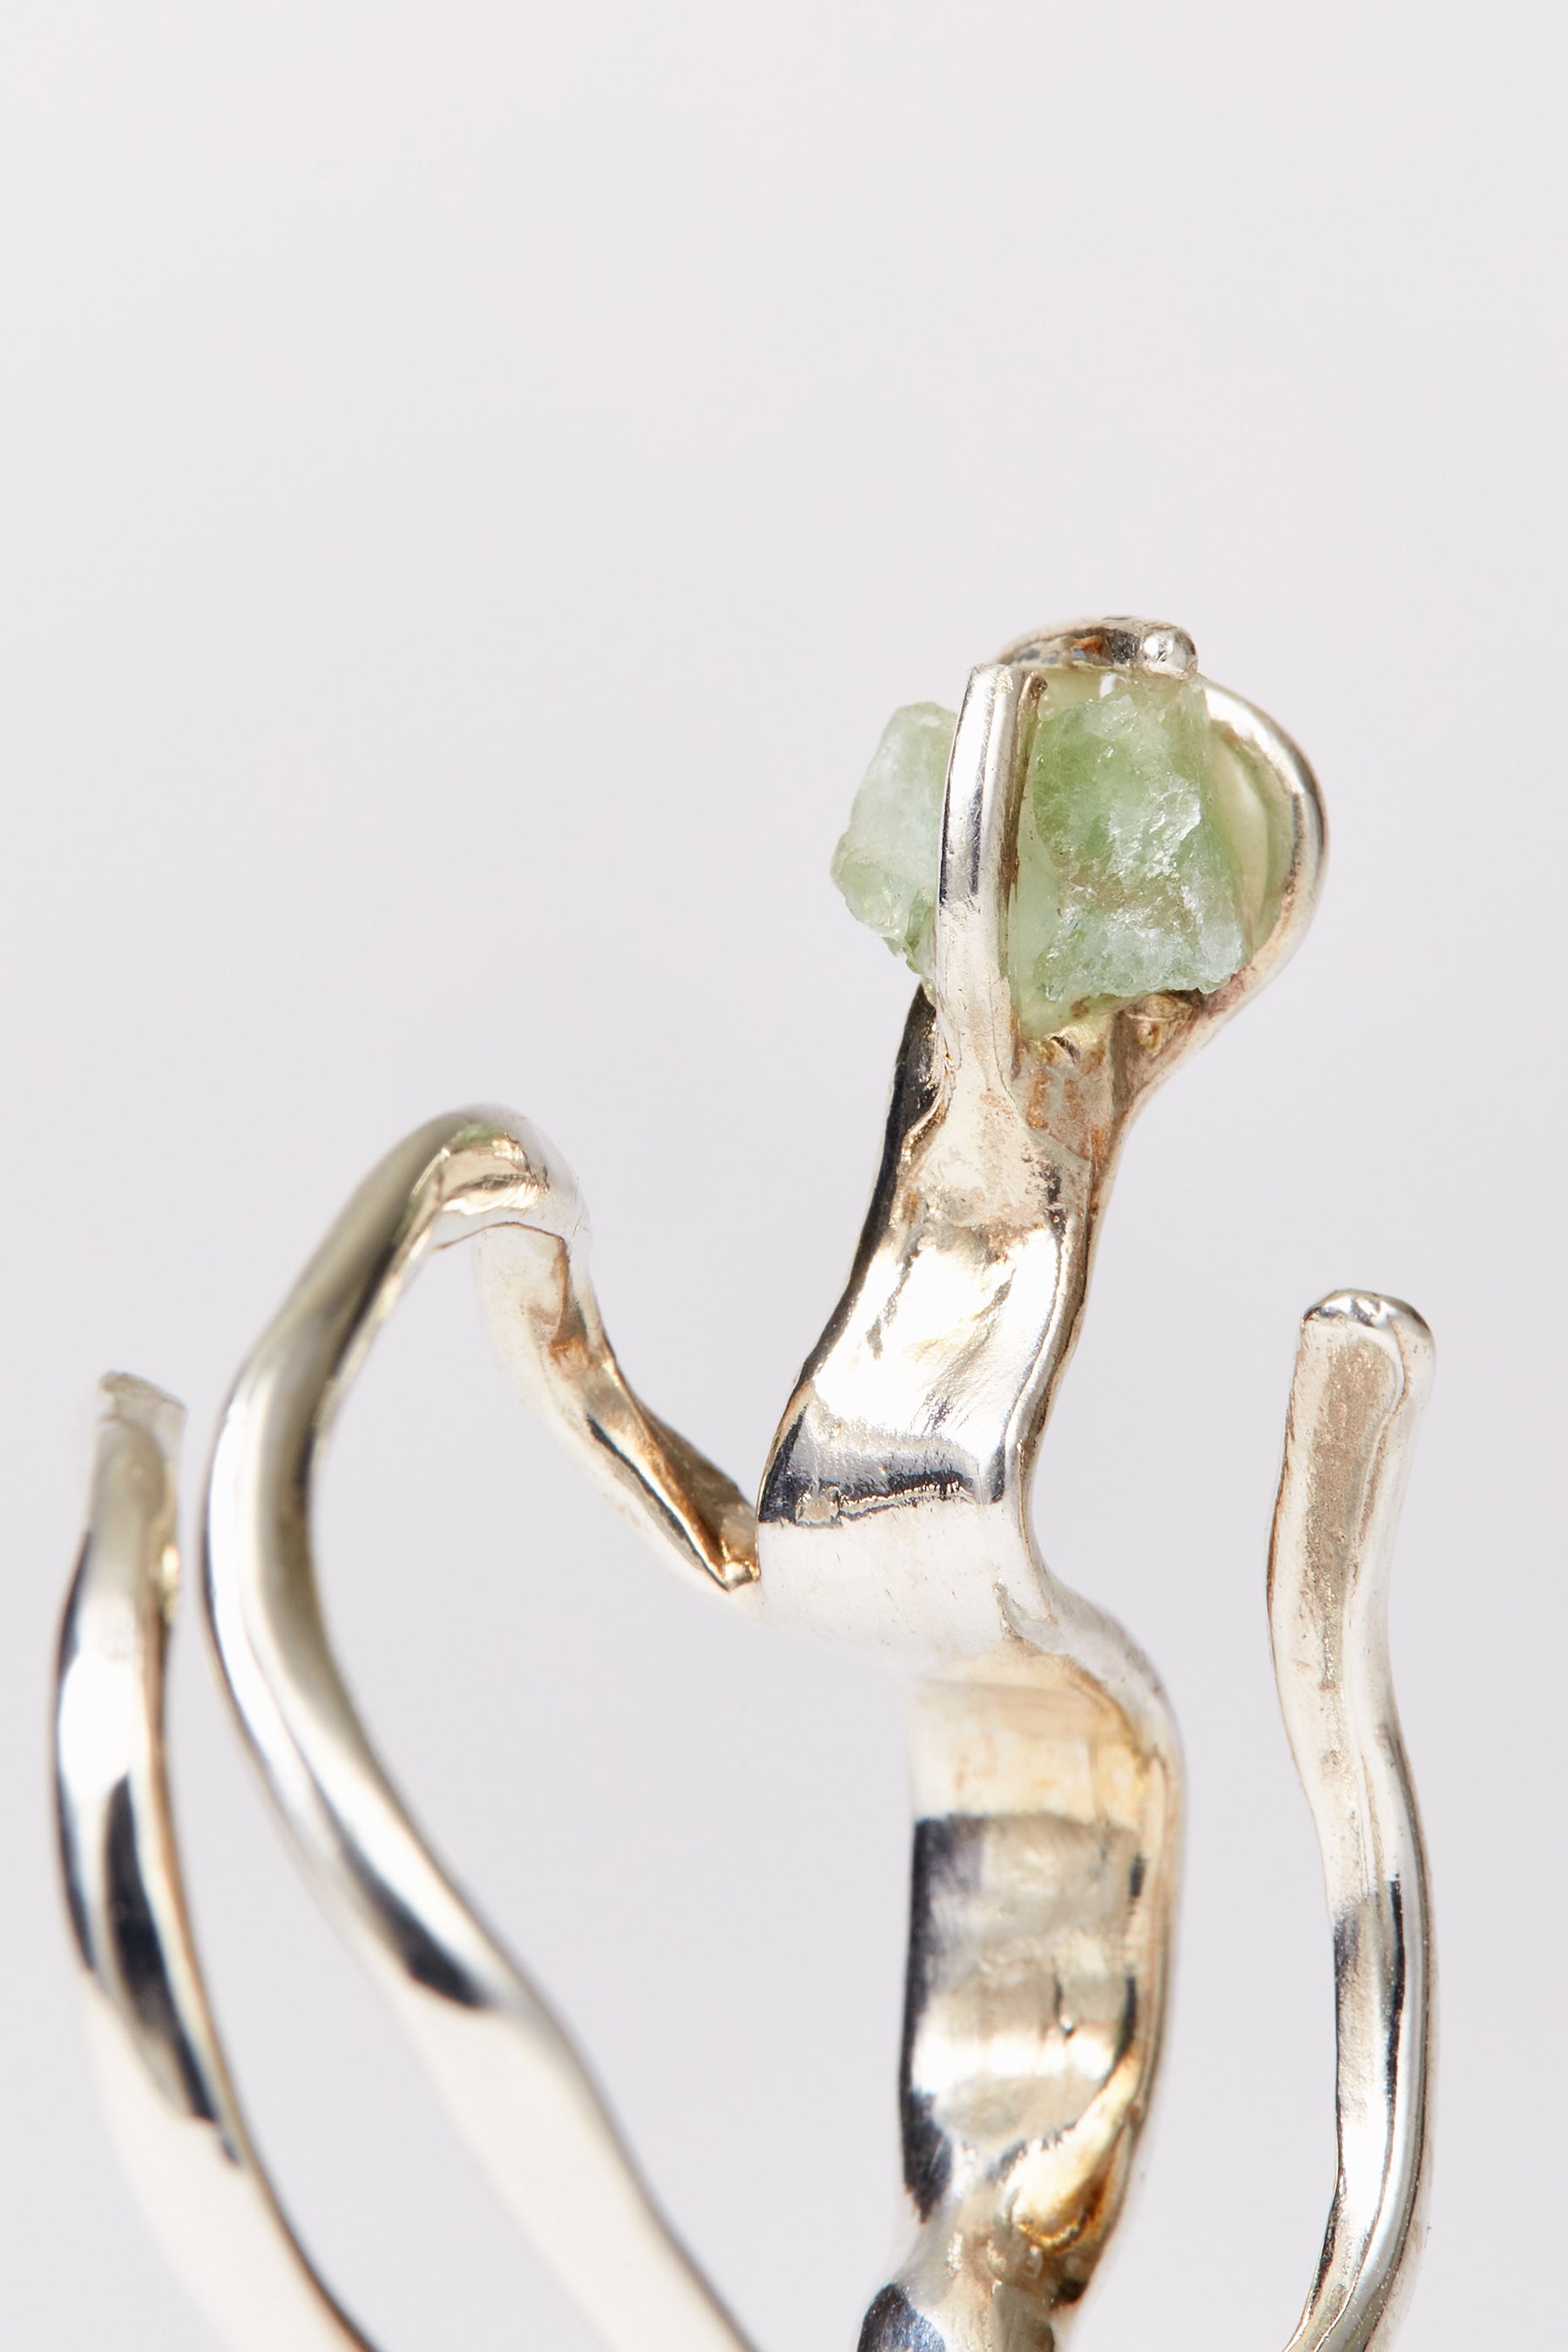 Spiral Silver Shirt Ring 002 with Green Fluorite